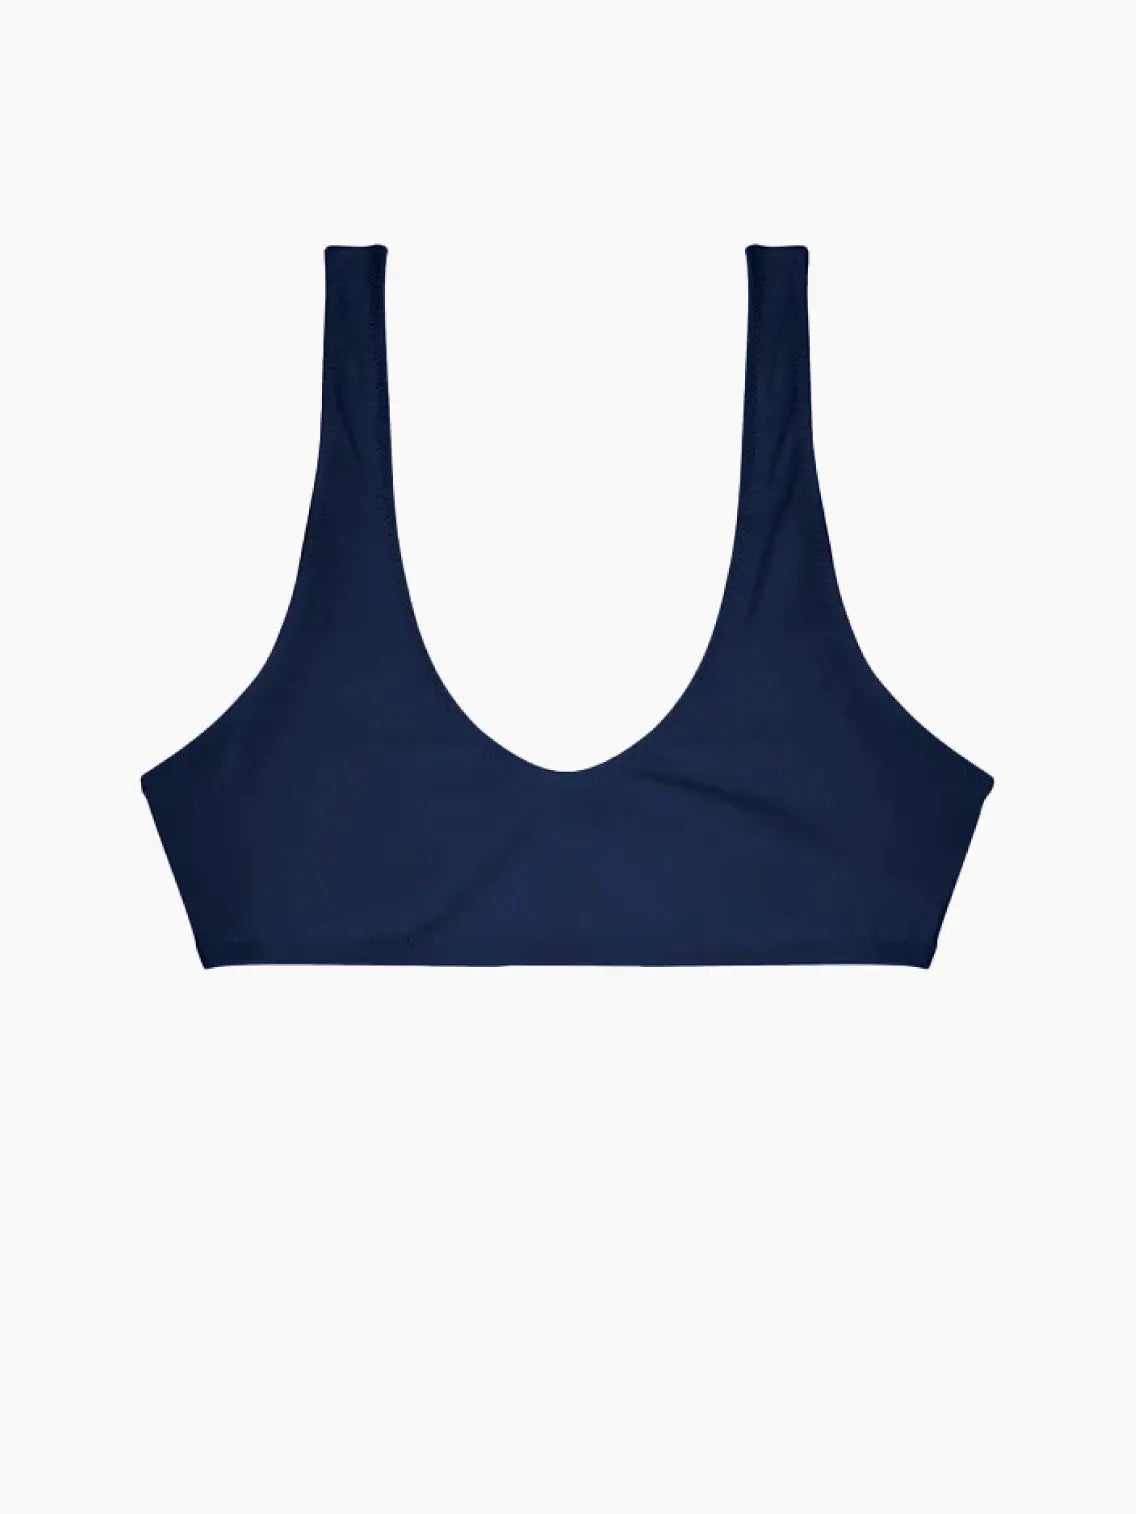 A Trentuno Bikini Top Navy Blue by Lido with a wide scoop neckline and thick shoulder straps, available at BassalStore in Barcelona. The fabric appears smooth and stretchy, offering a simple and minimalistic design against a plain white background.